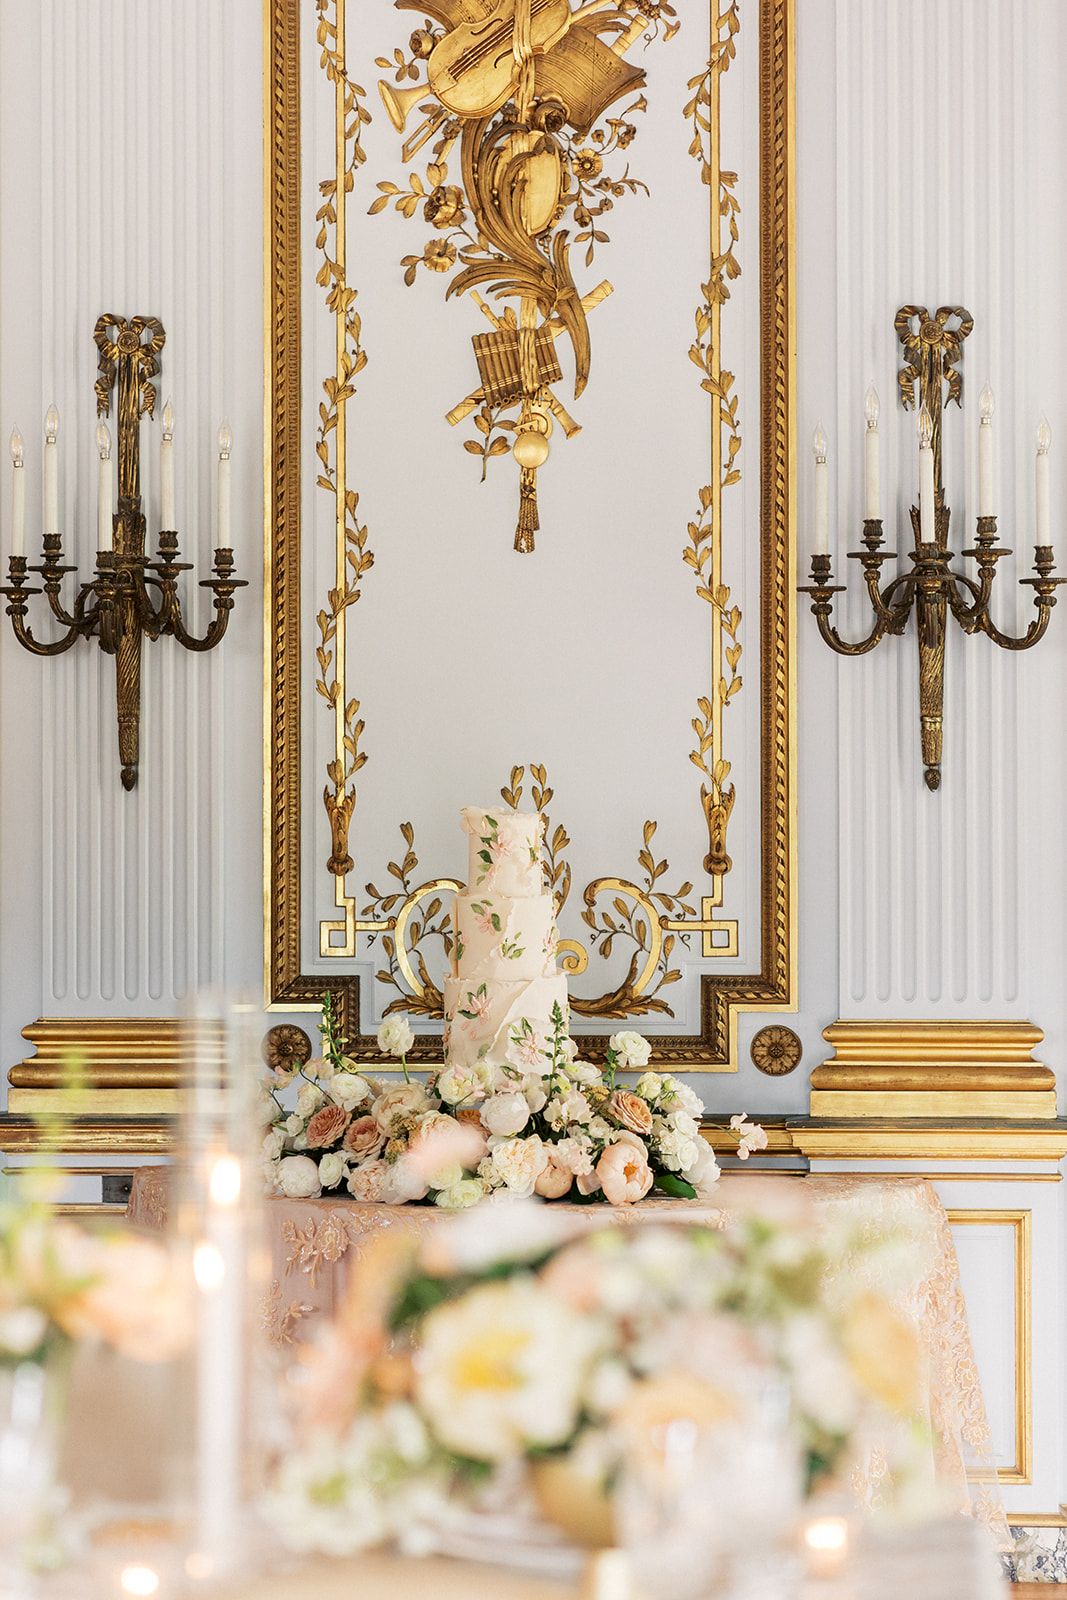 Details of a cake sitting under ornate gold decor and wall sconces